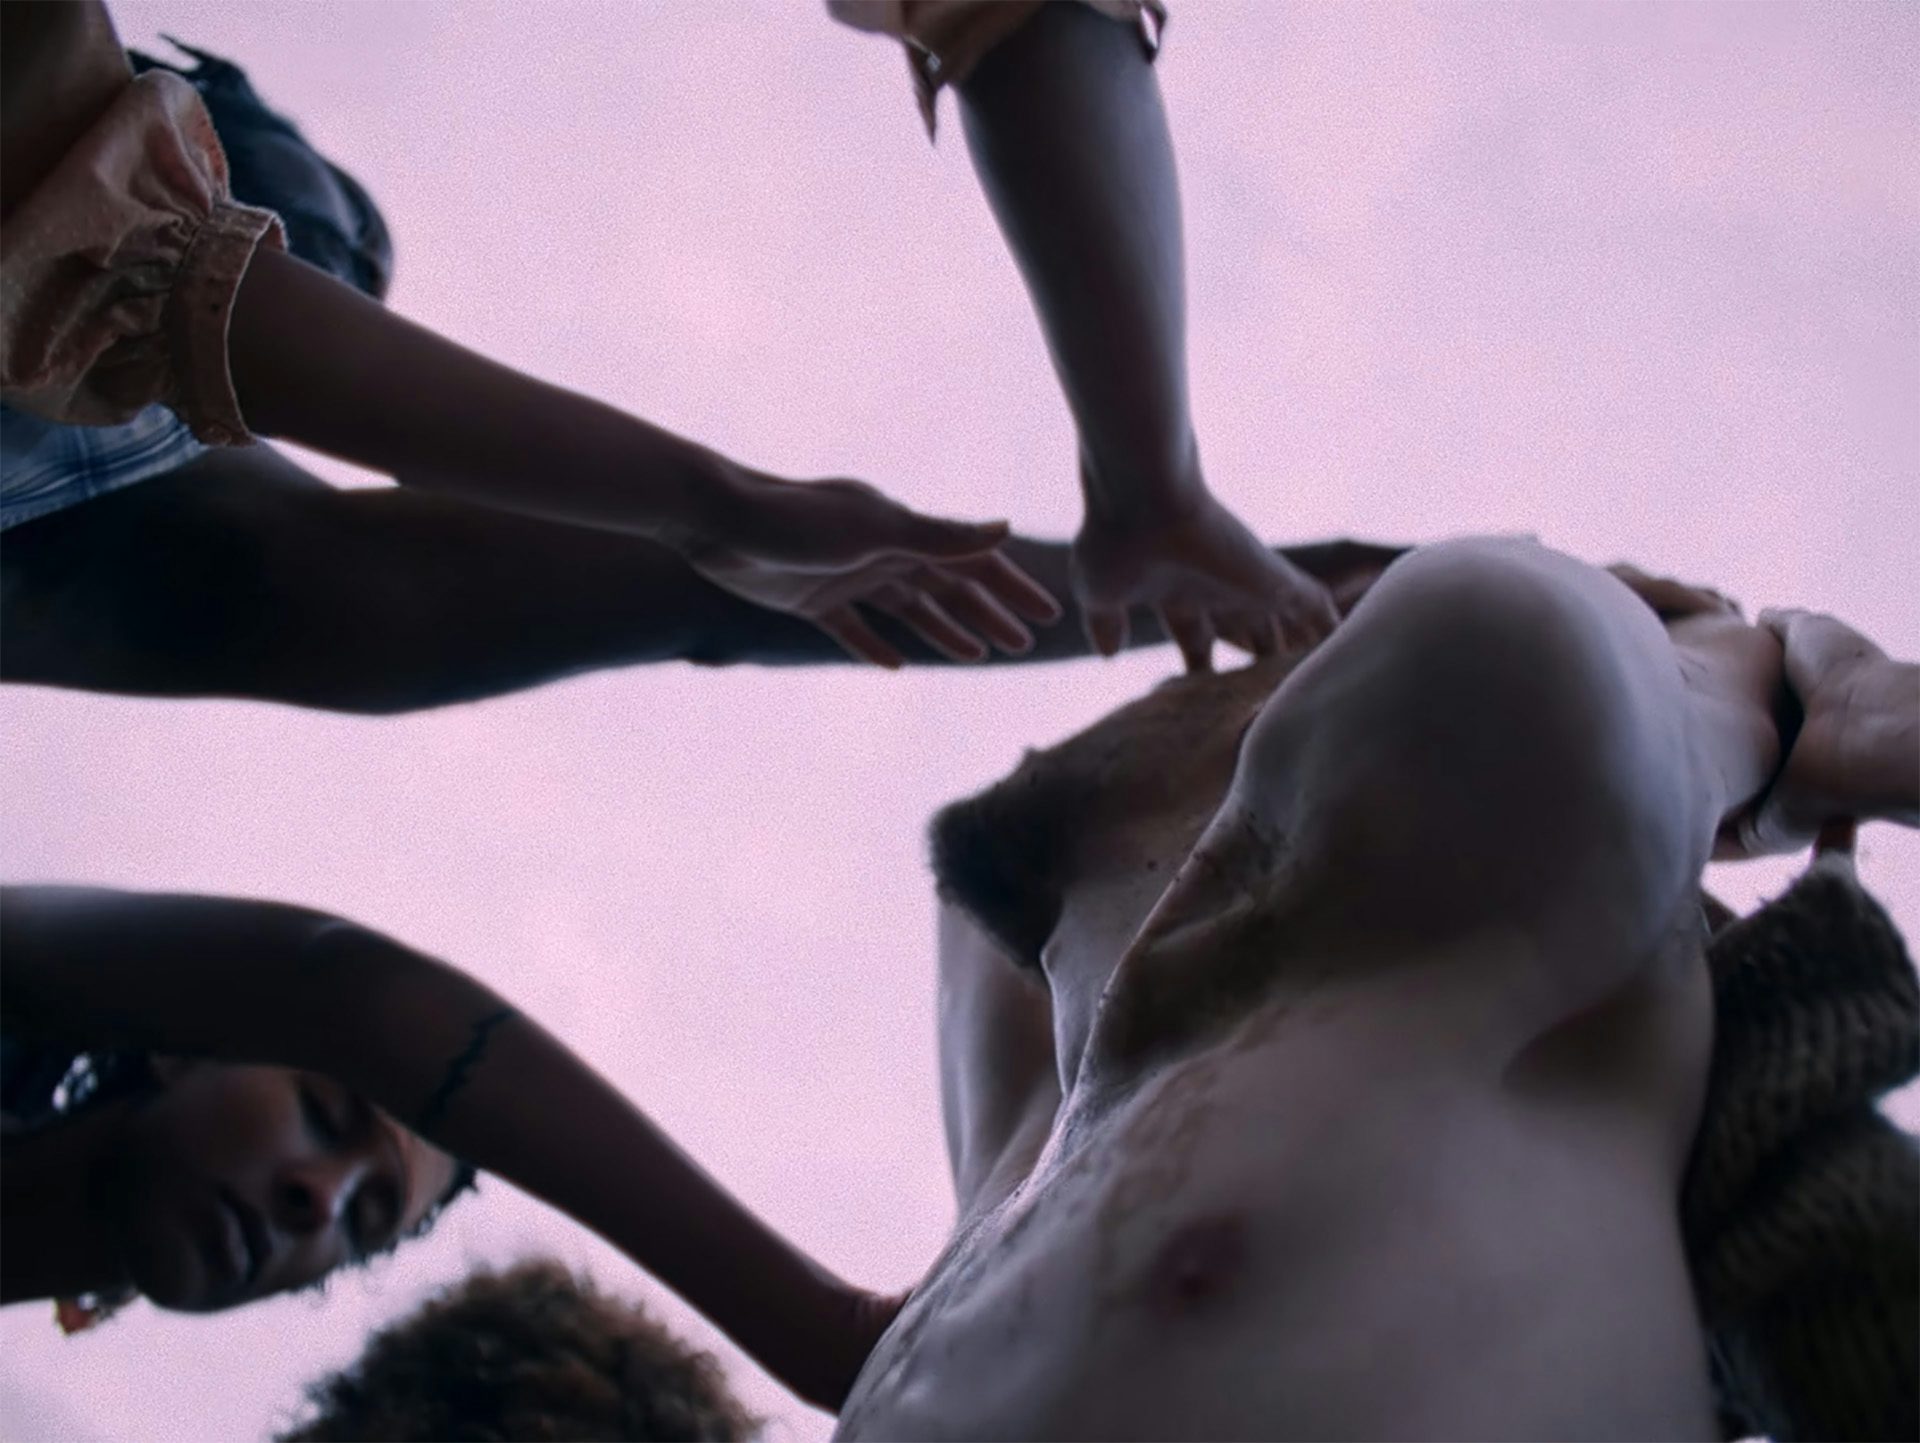 Still image shows a person being carressed by a group in the music video for I Saw by Young Fathers